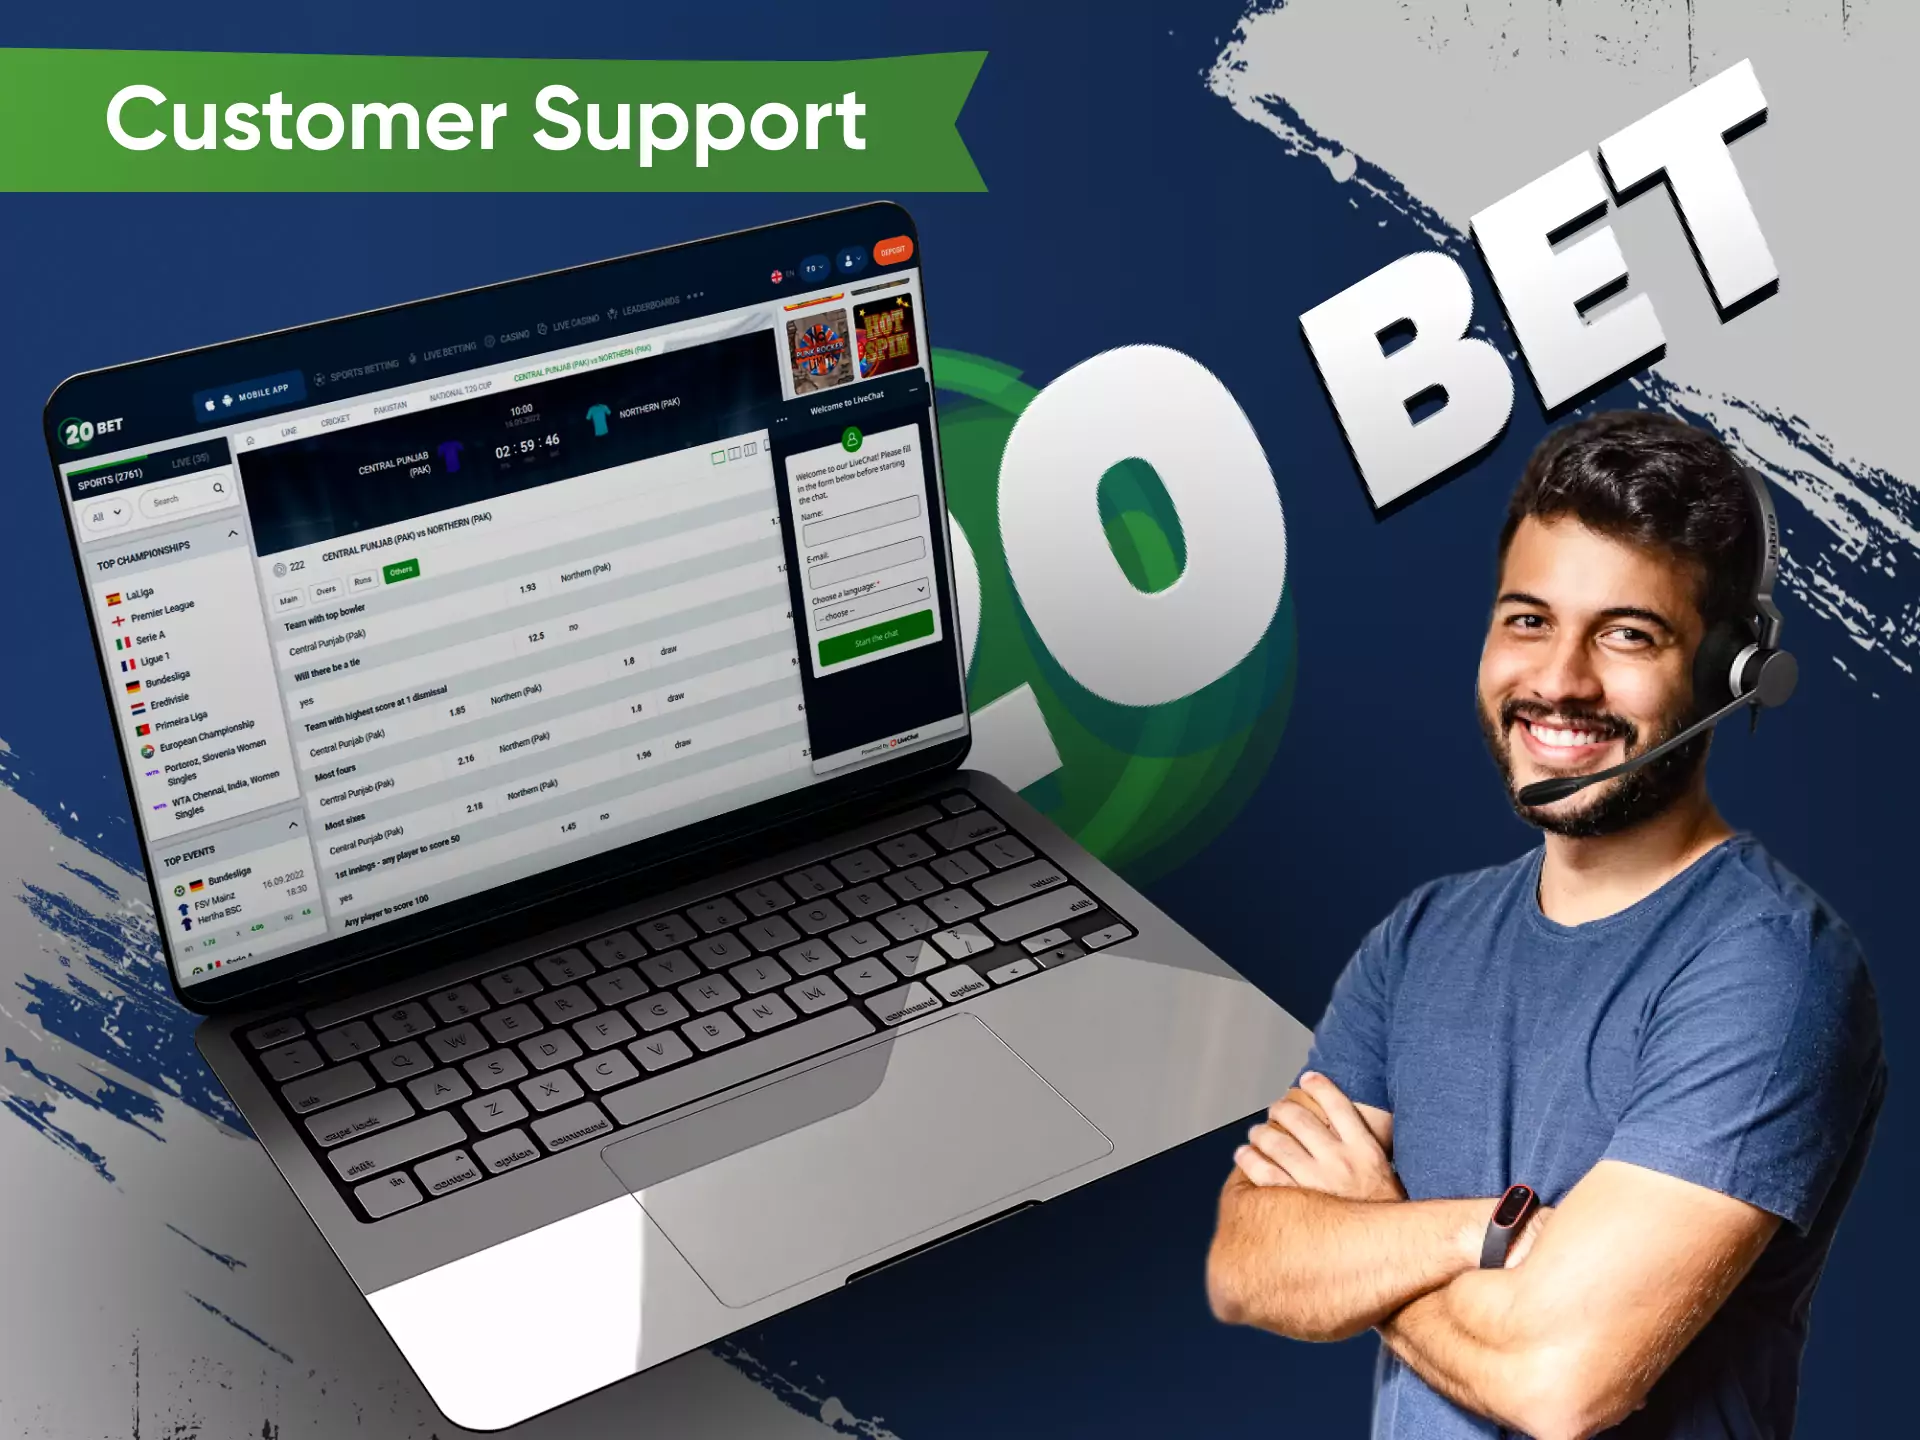 If you have questions, feel free to ask 20bet customer support.